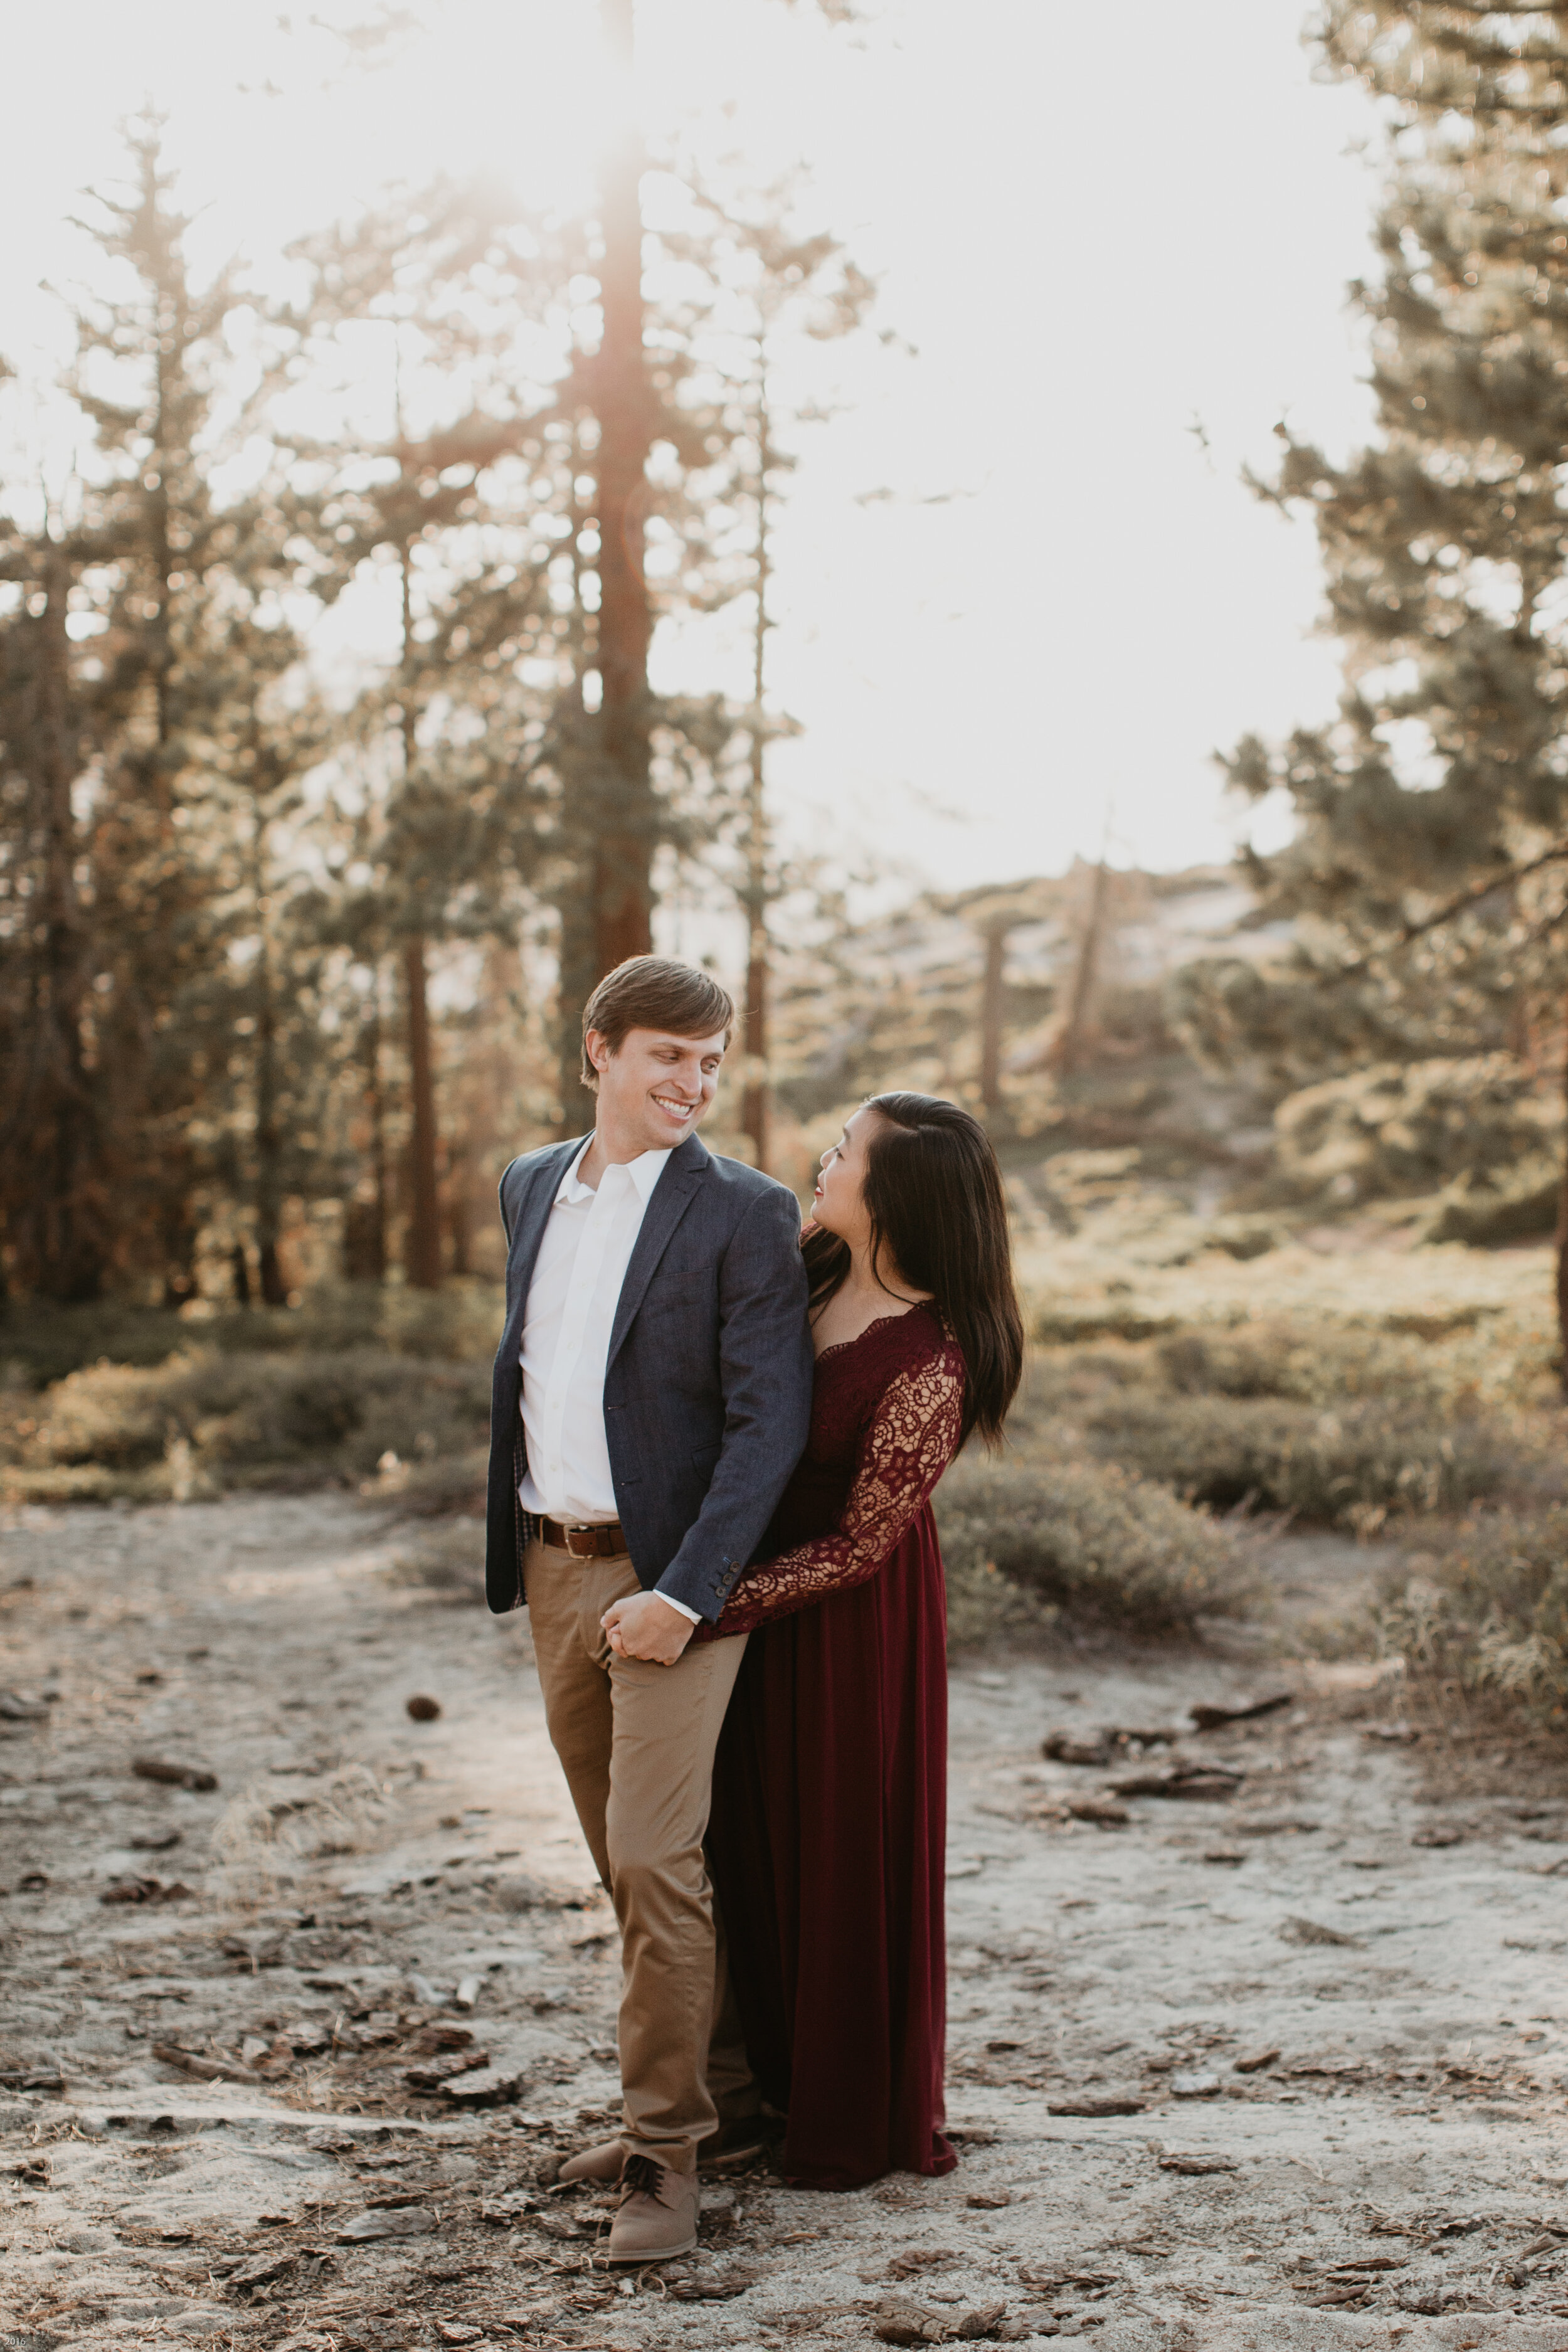 yosemite-national-park-couples-session-at-taft-point-and-yosemite-valley-yosemite-elopement-photographer-nicole-daacke-photography-123.jpg